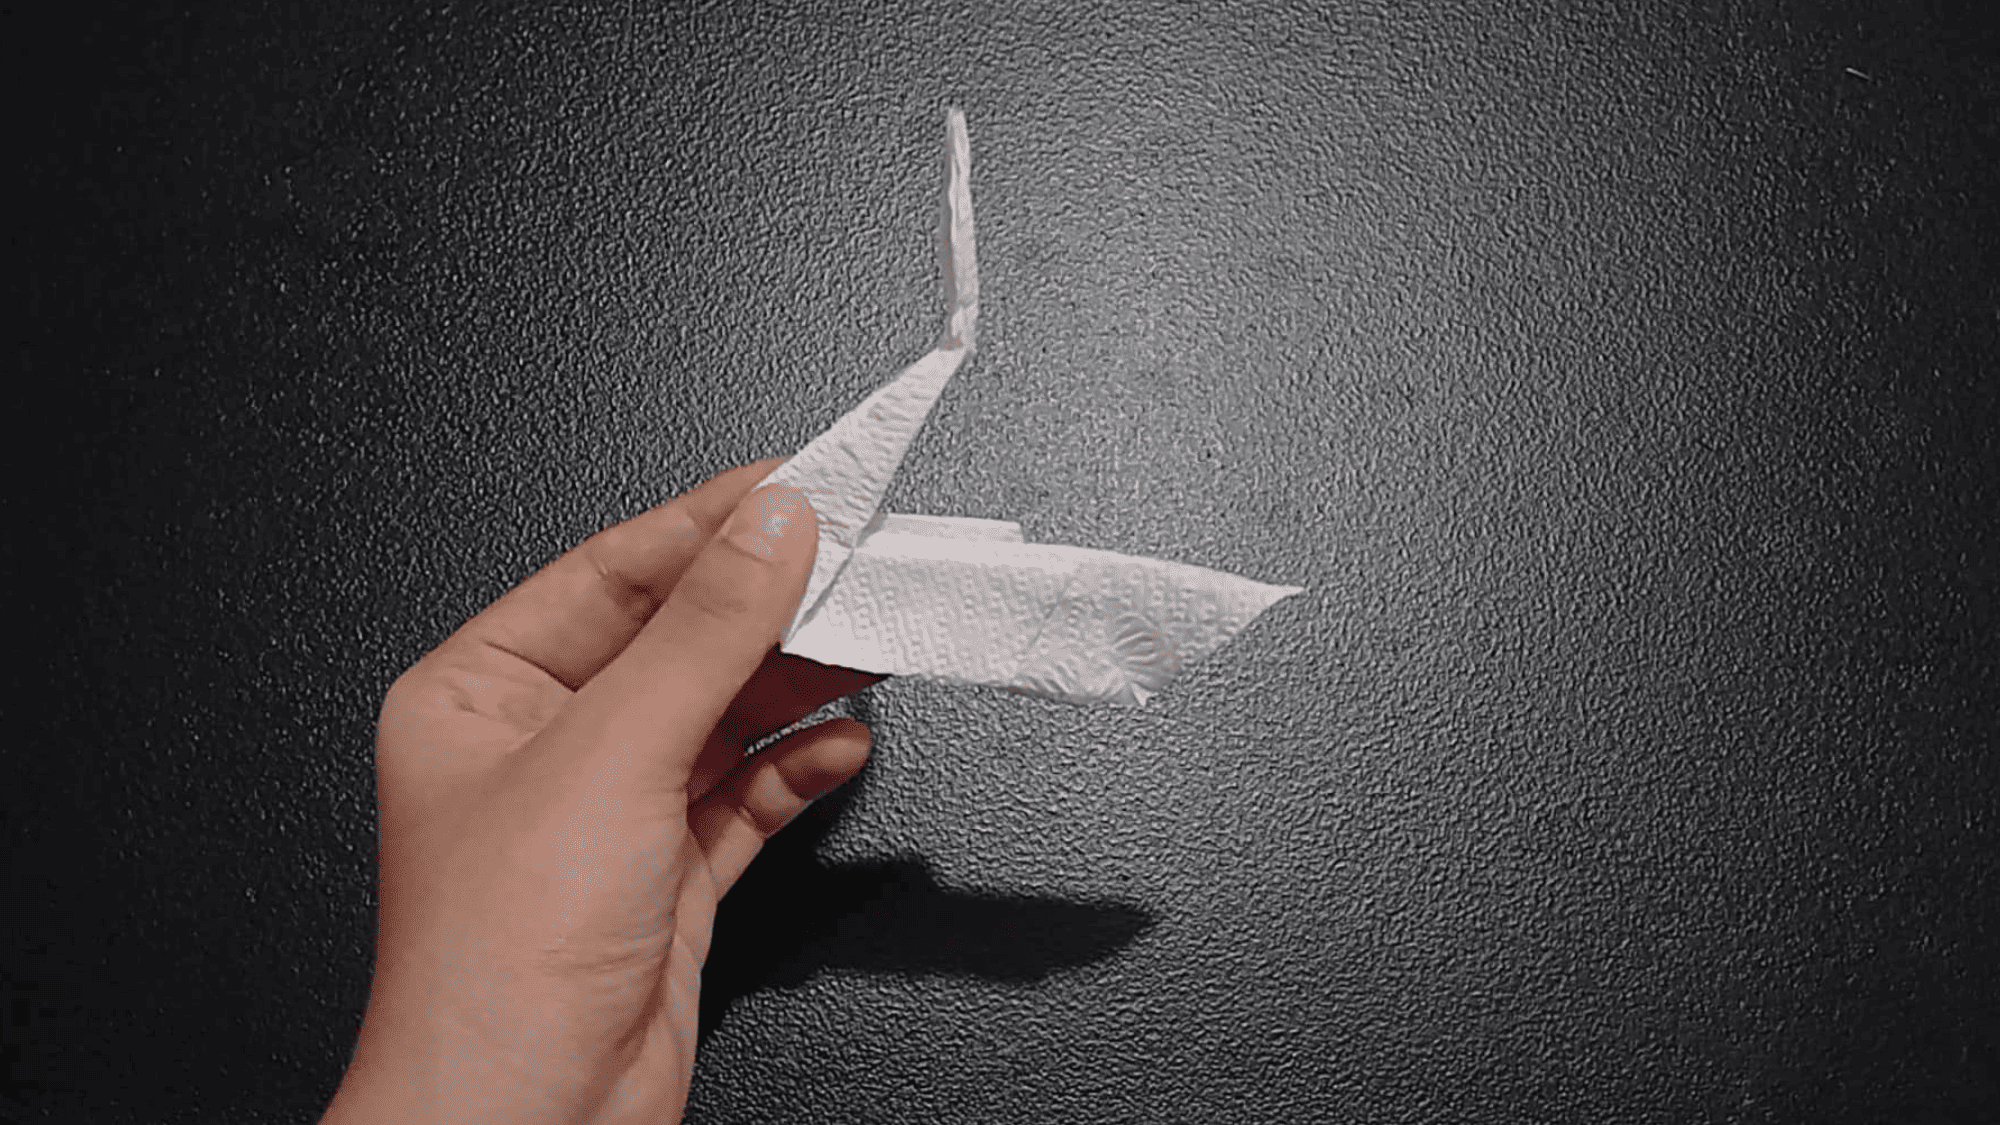 How To Make A Swan With A Cloth Napkin